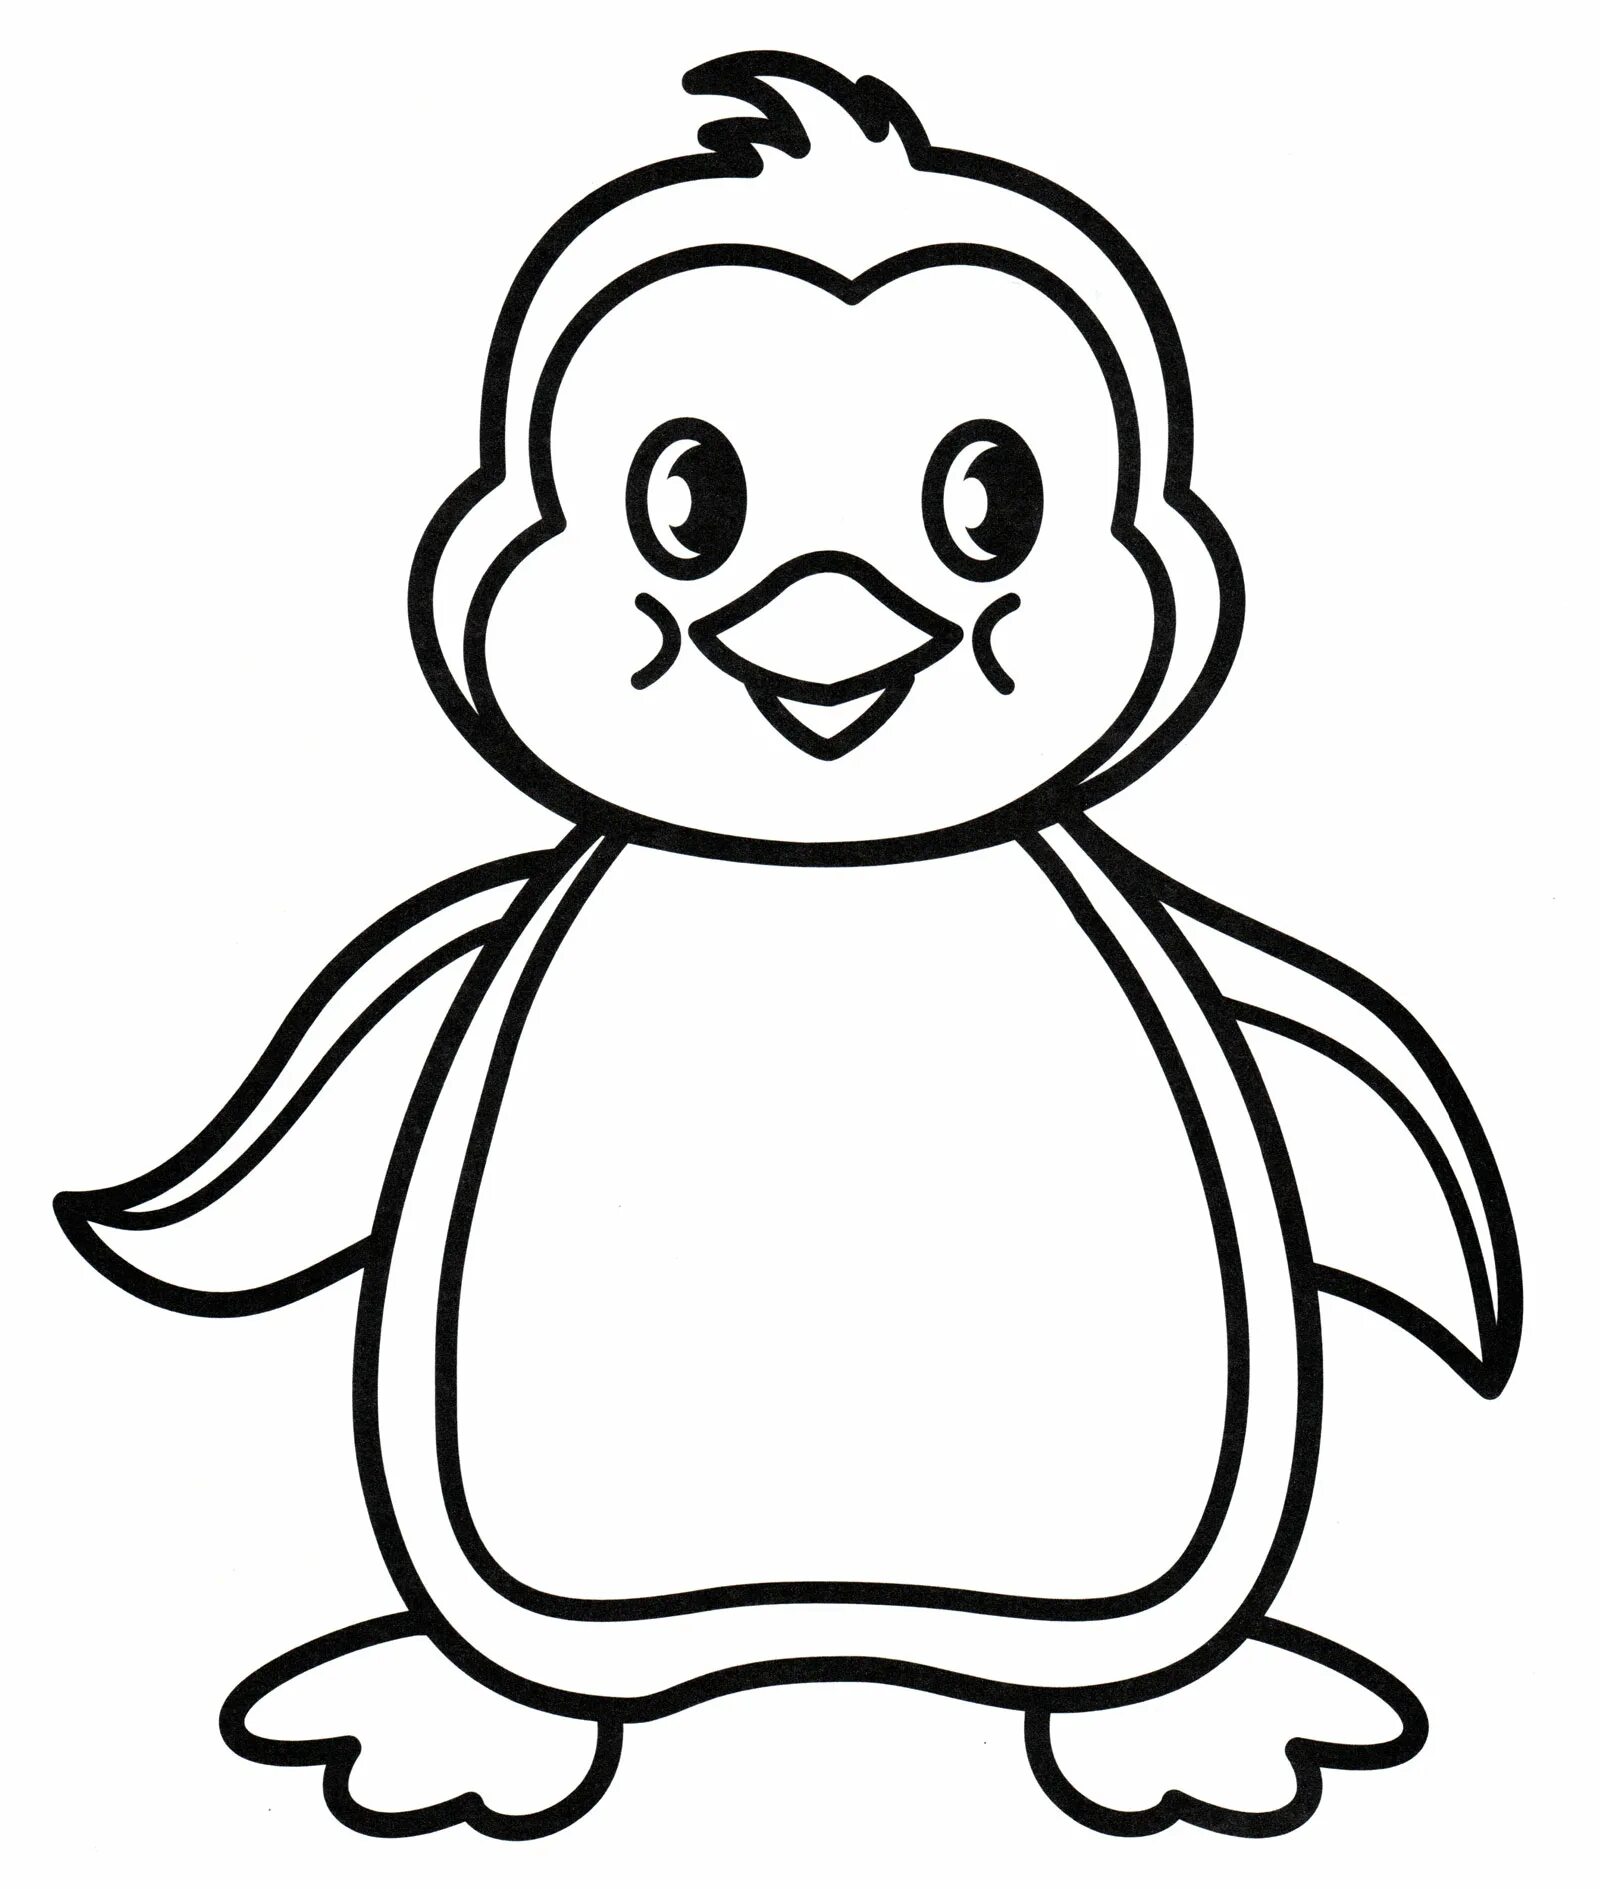 Coloring page glamor penguin